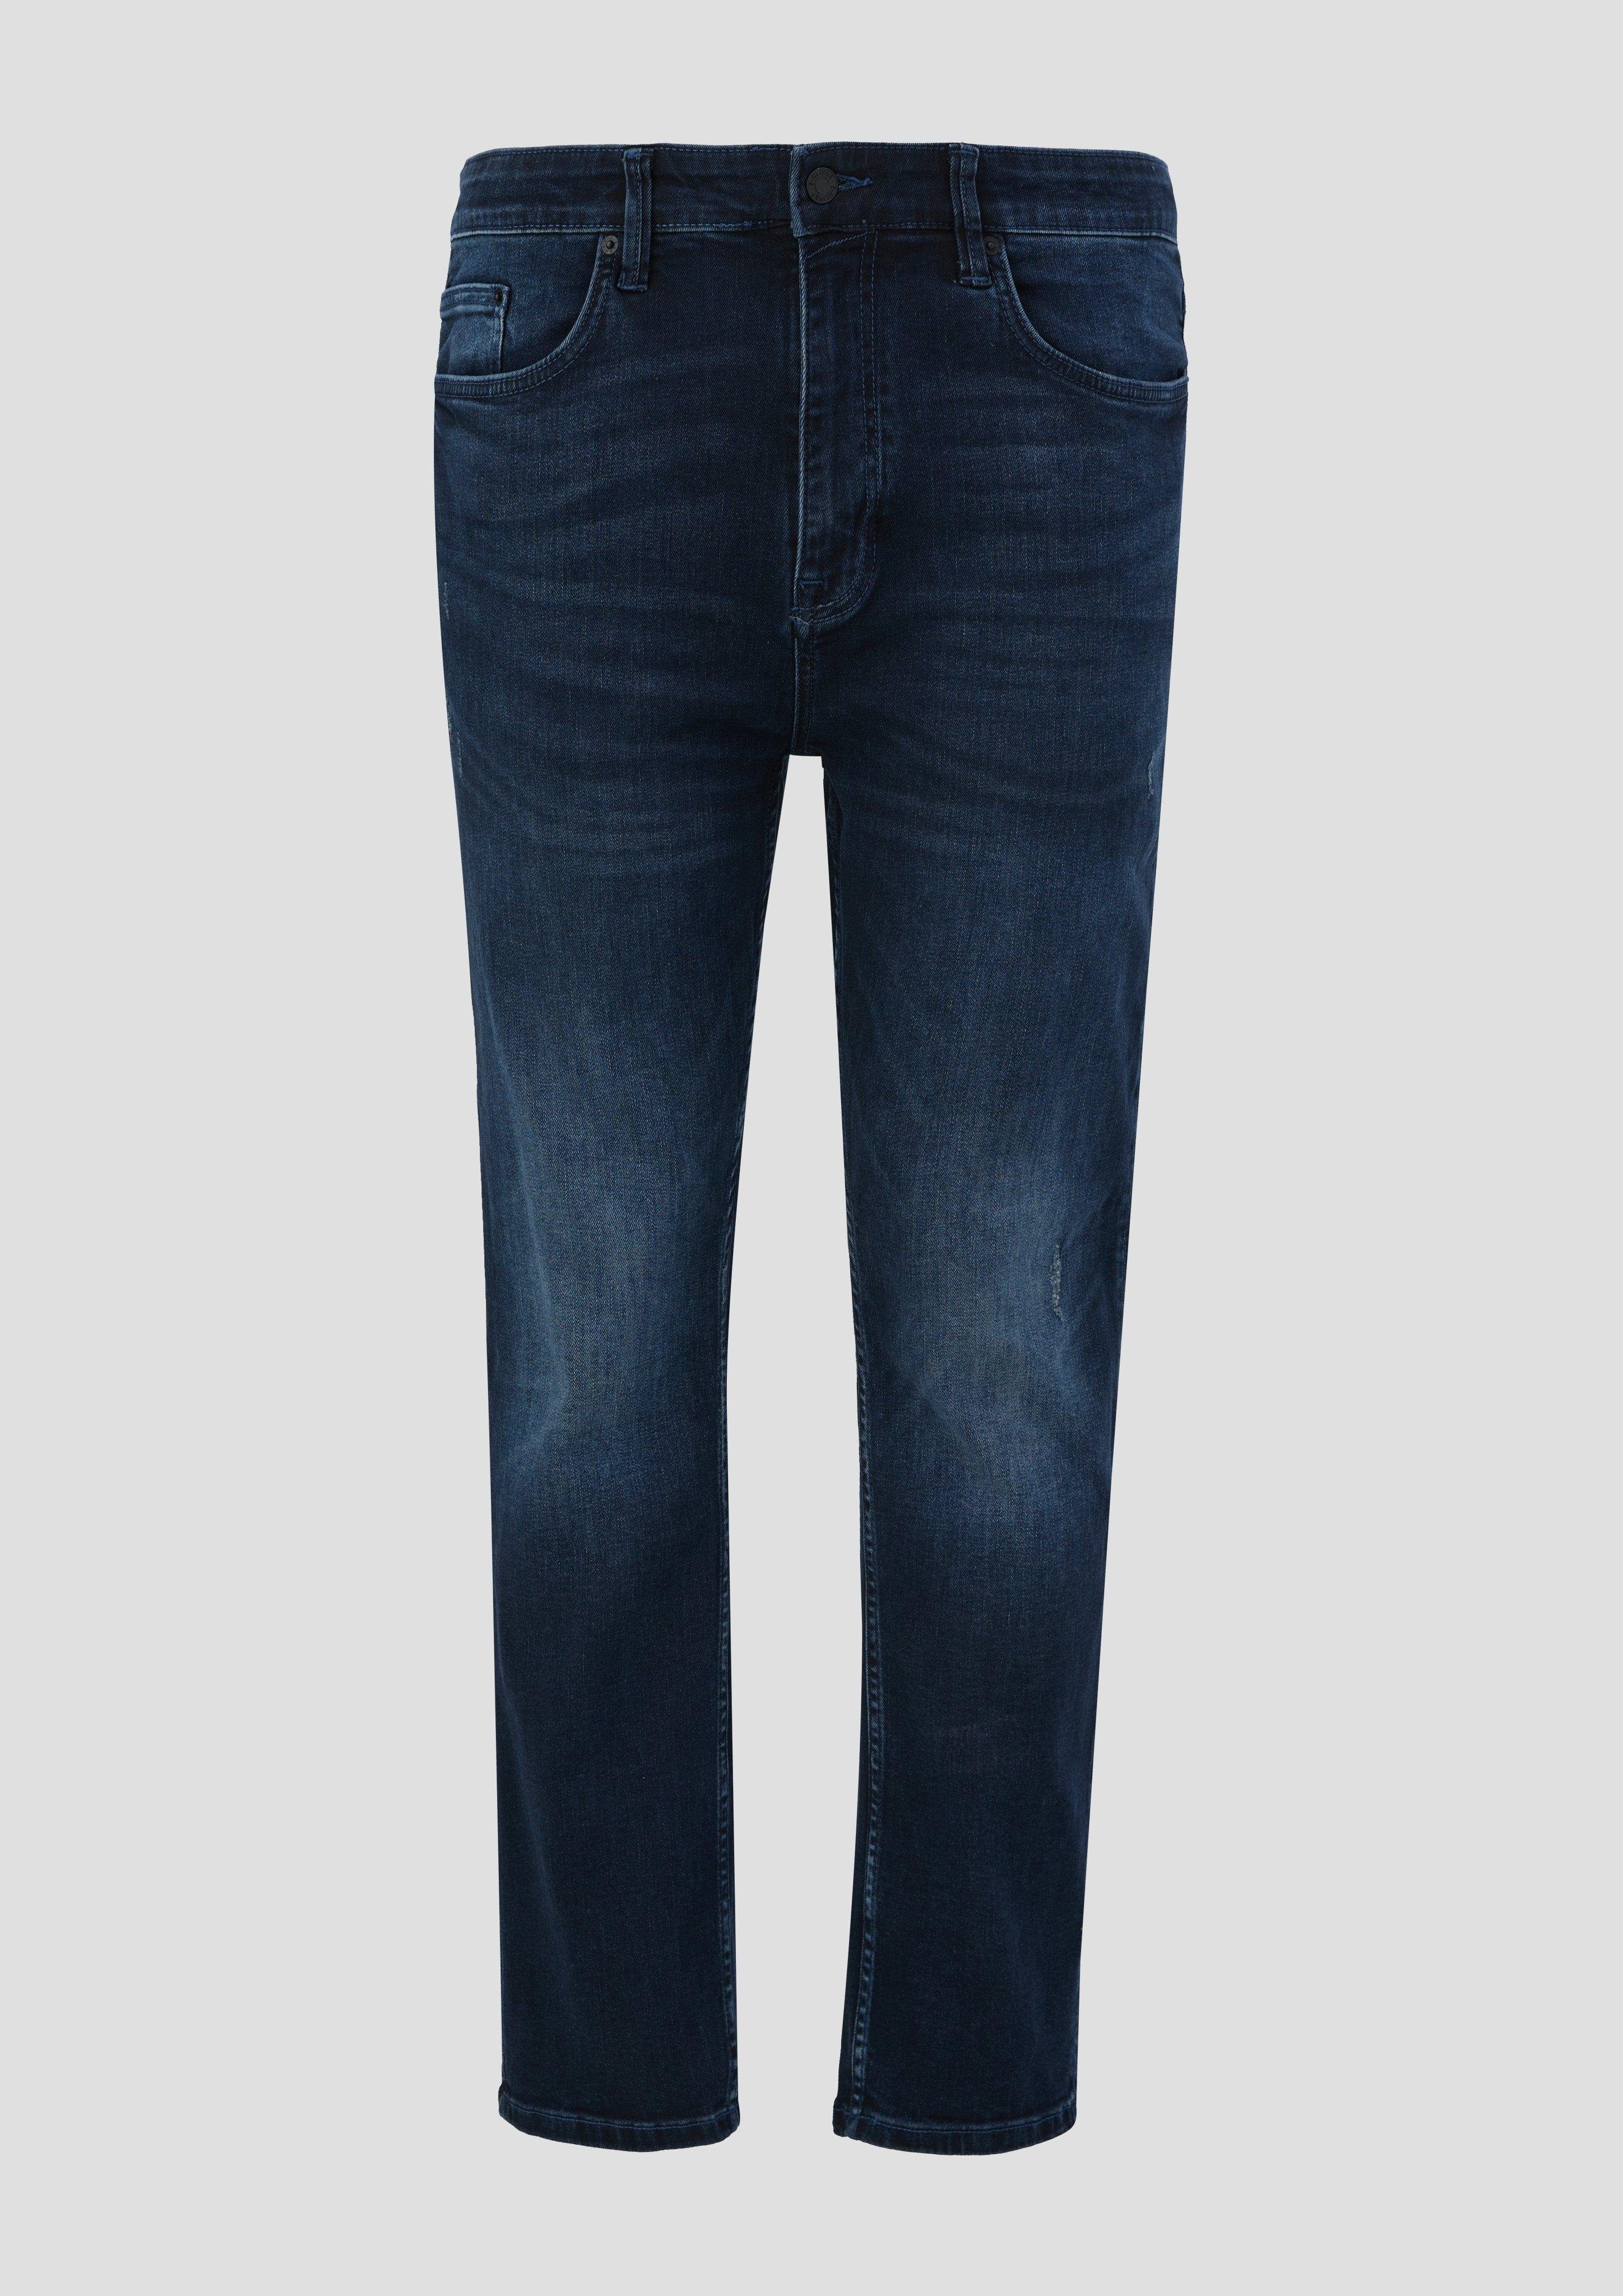 s.Oliver Stoffhose Jeans Casby / Relaxed Fit / Mid Rise / Straight Leg dunkelblau